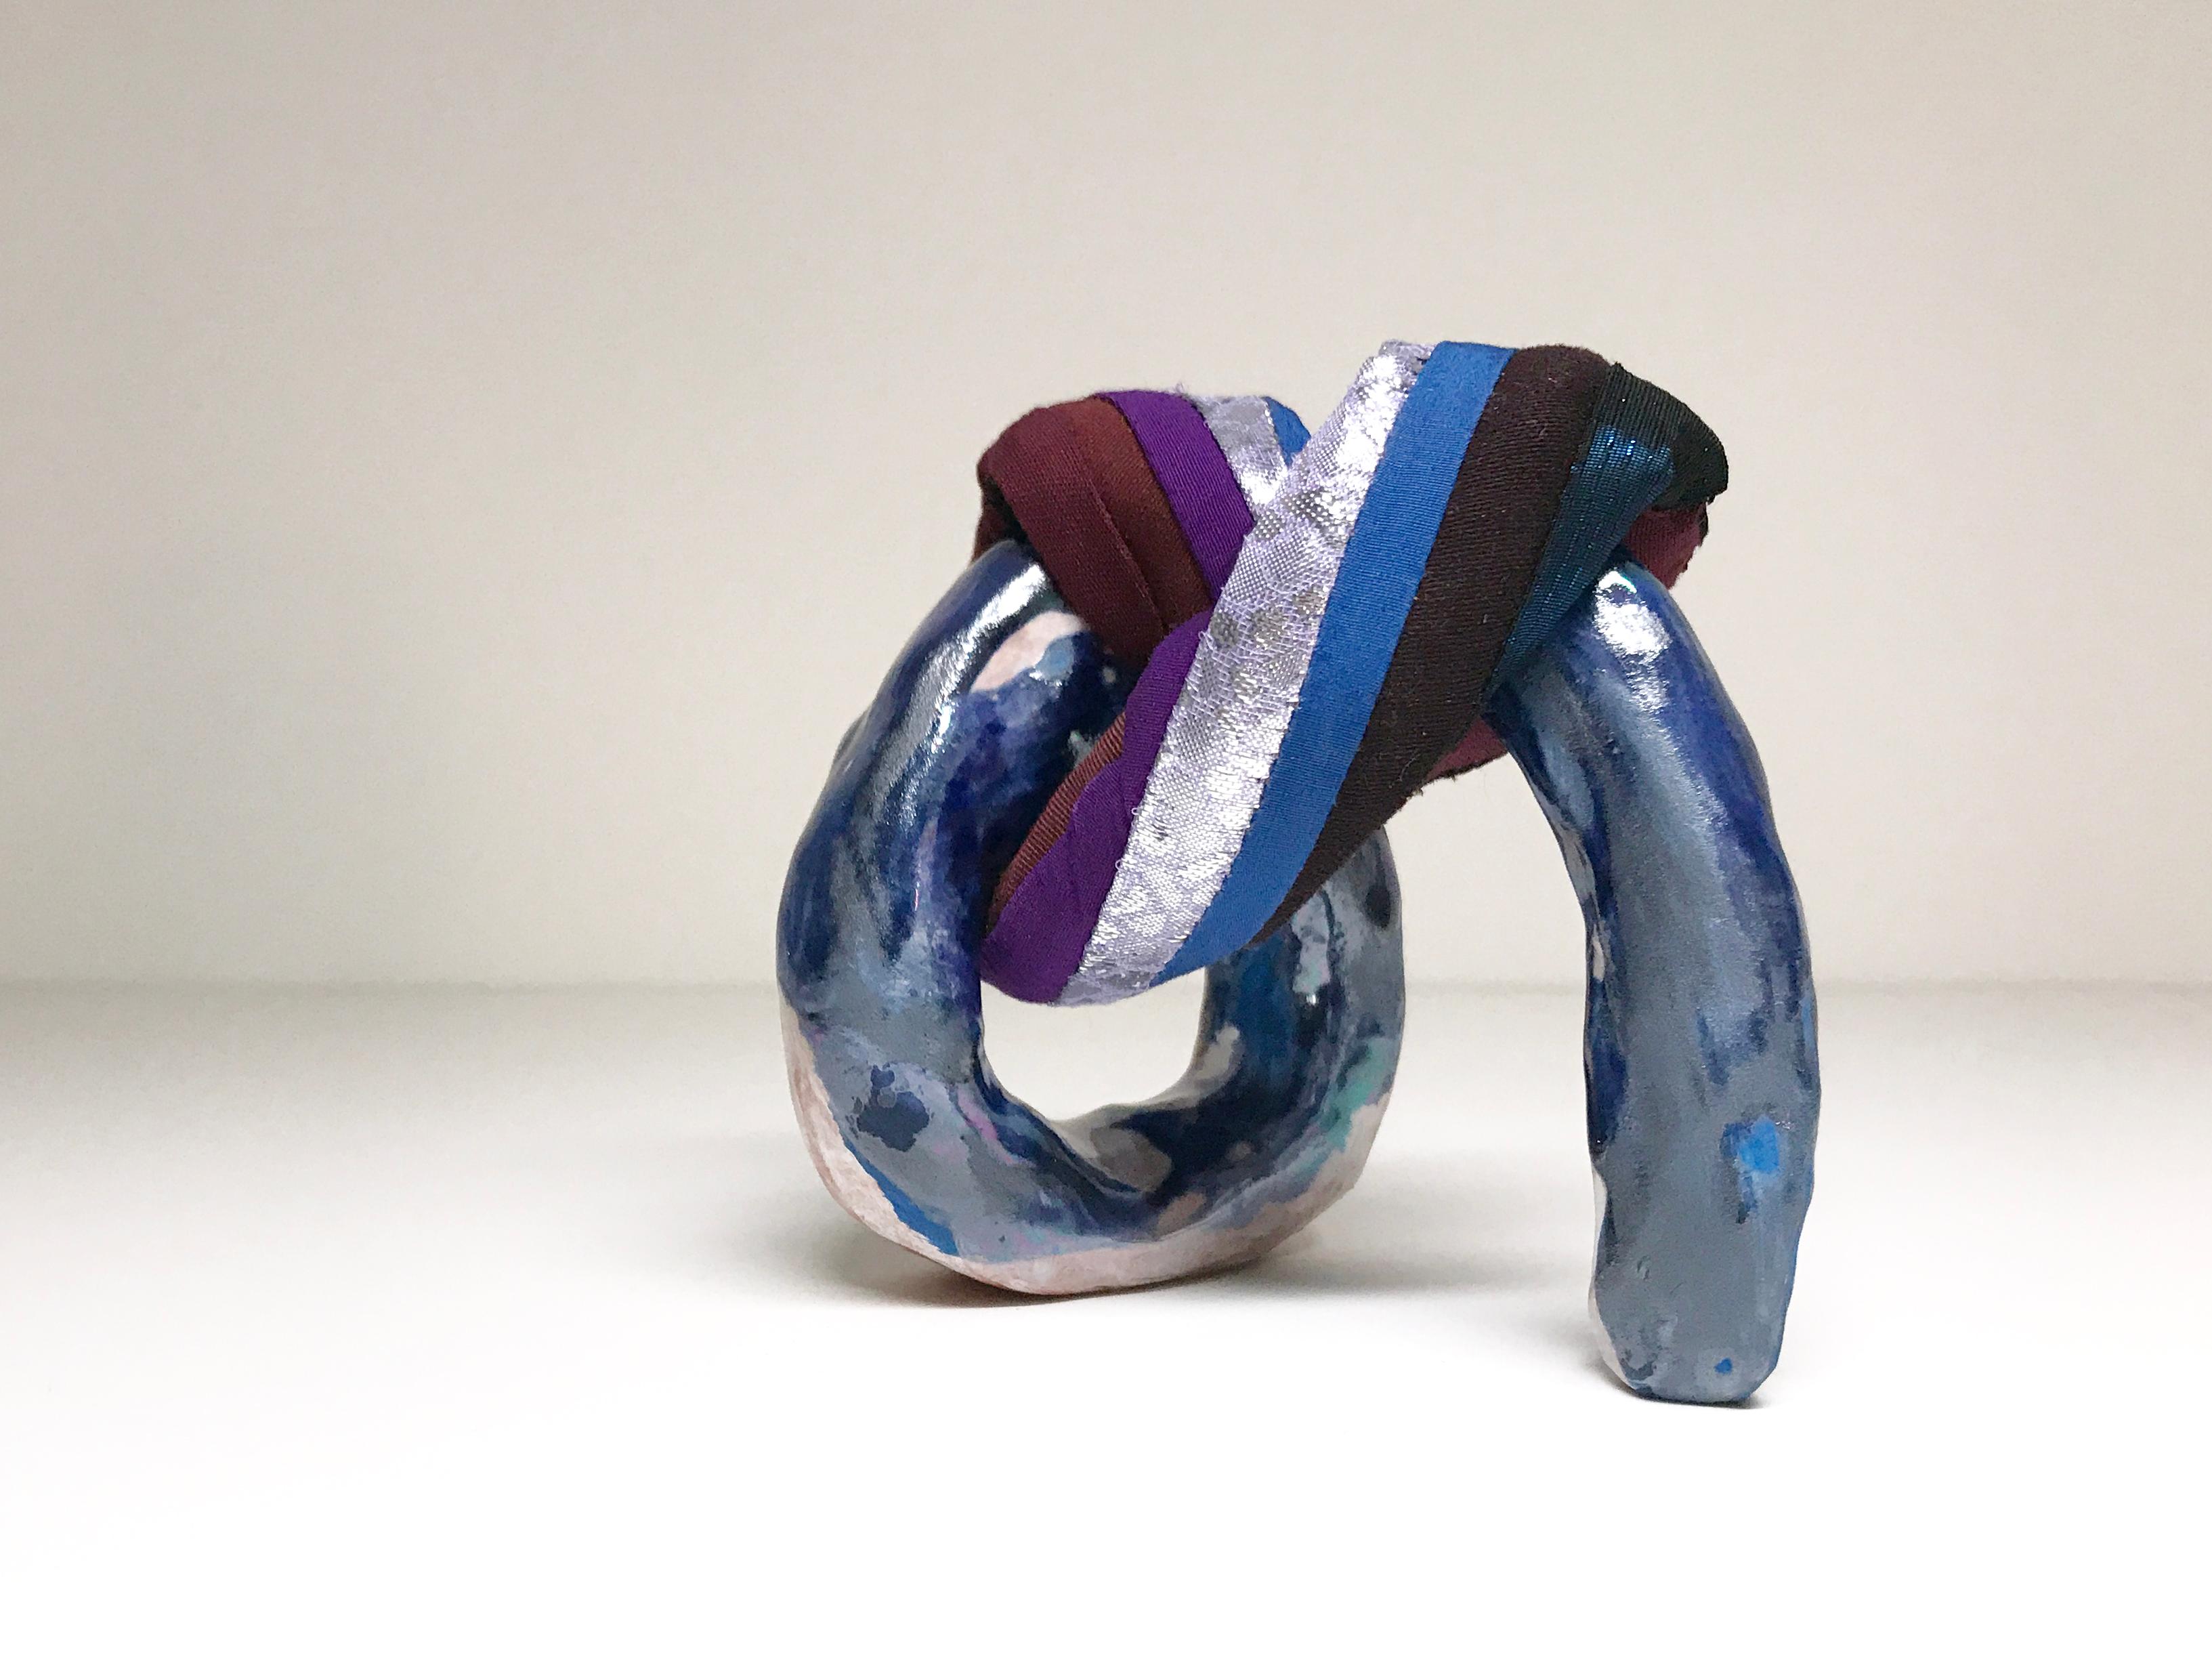 Ceramic and textile small sculpture: 'No. 18' - Gold Abstract Sculpture by Ak Jansen